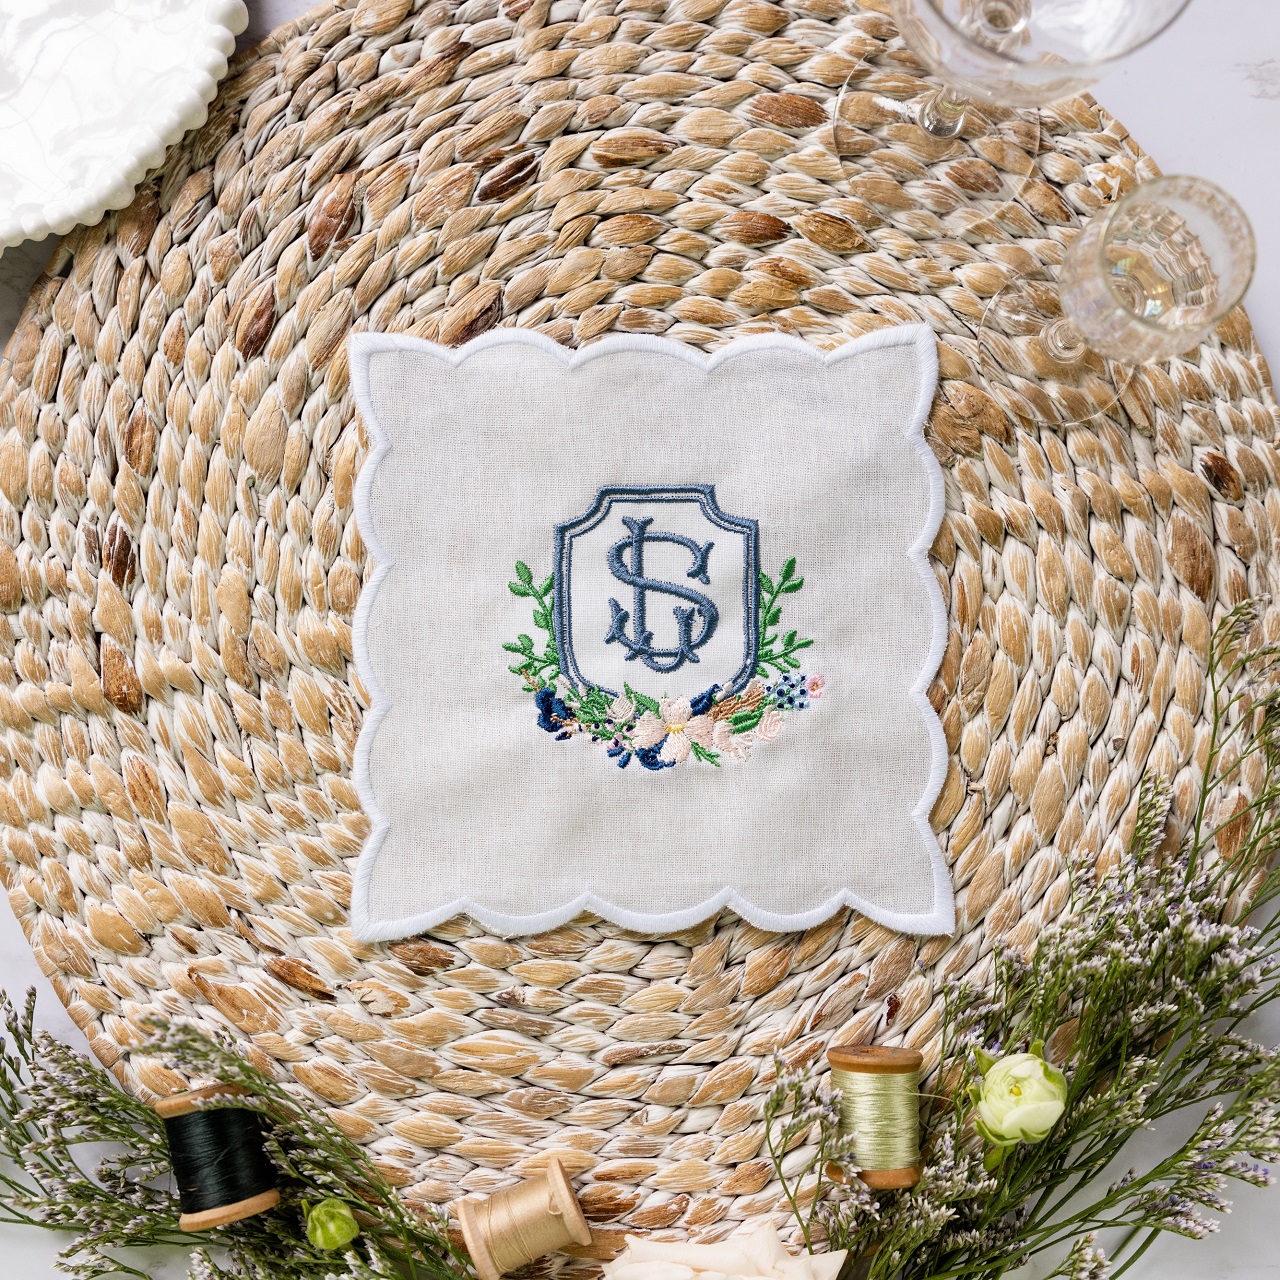 Custom cocktail napkin created with embroidered wedding crest design. Shown with woven mat and threads for decoration.